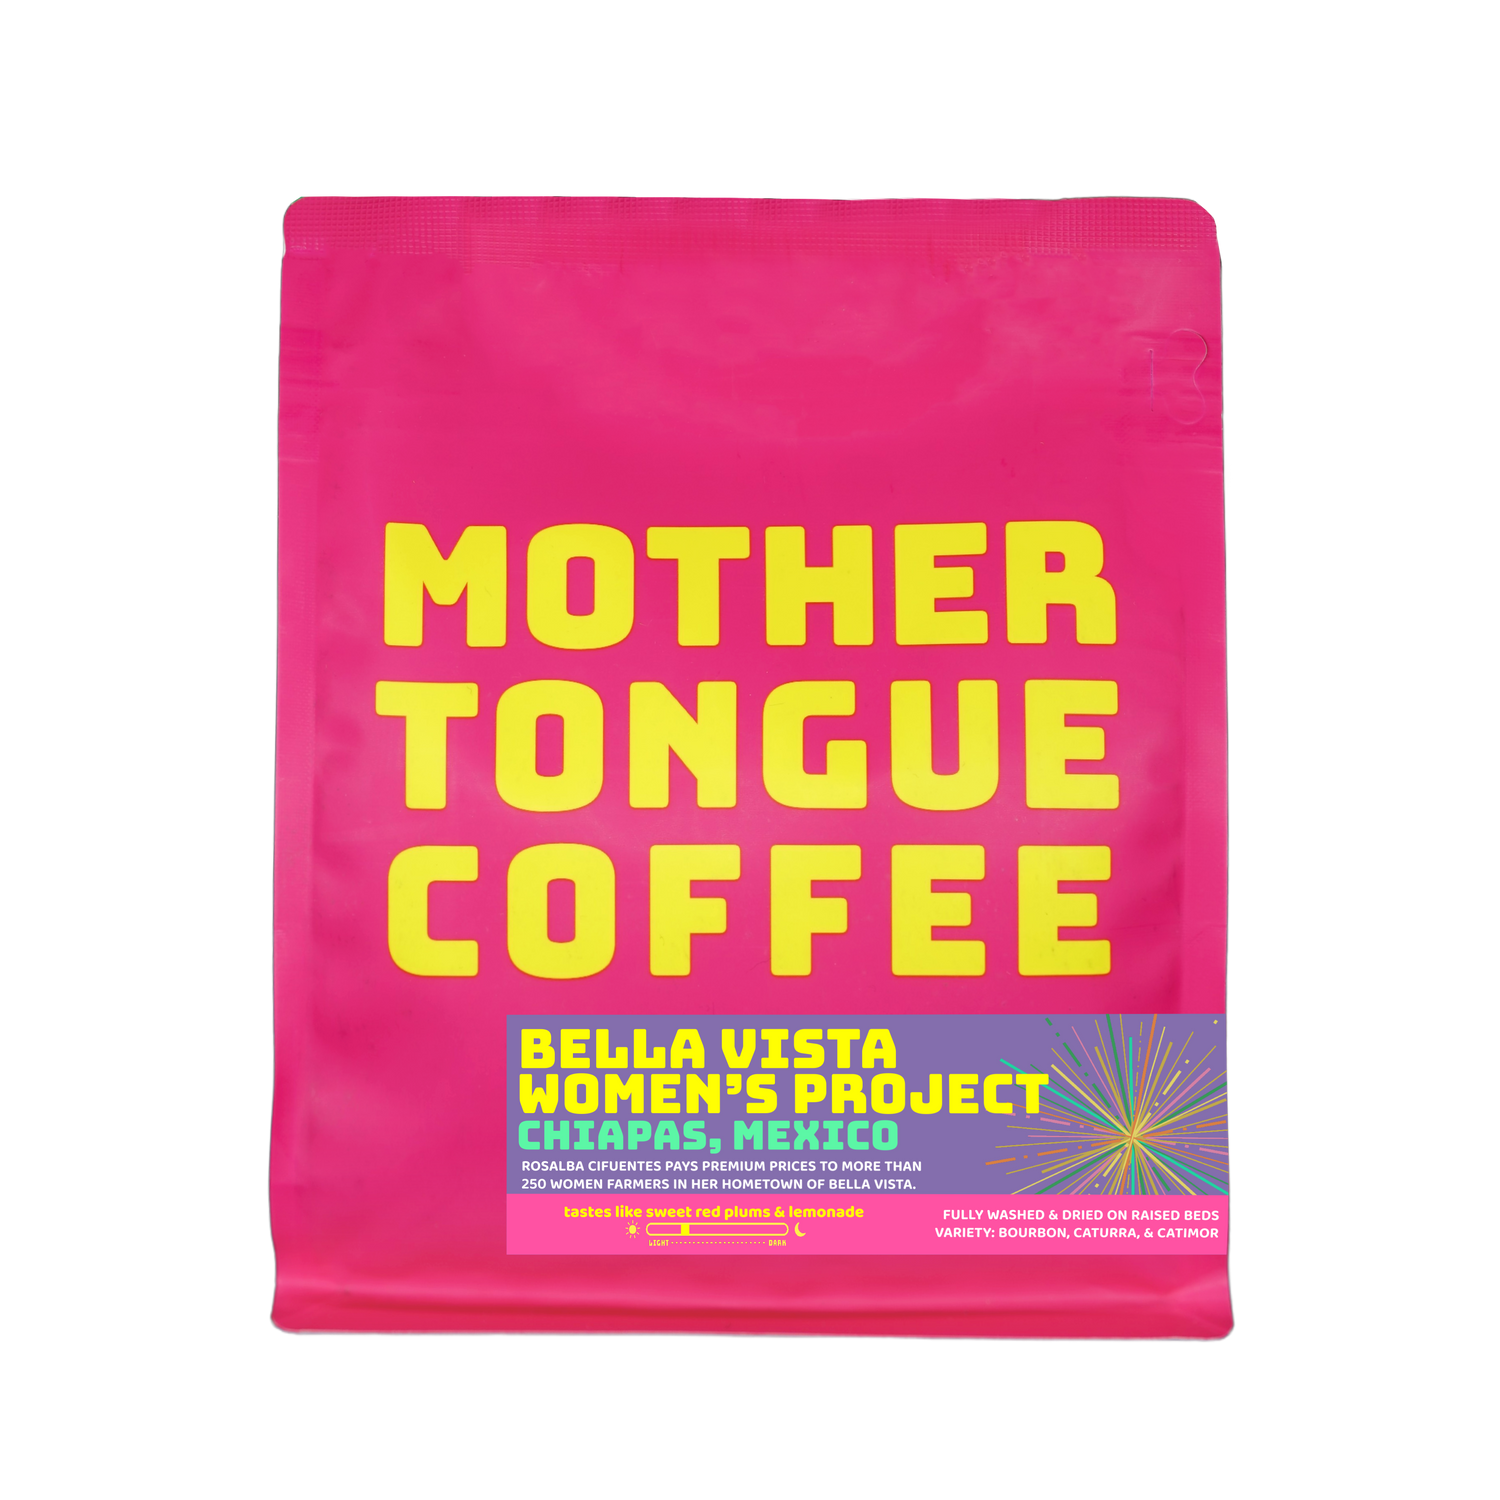 WOMEN'S GROUP BELLA VISTA - Chiapas, Mexico (washed process) - Mother Tongue Coffee